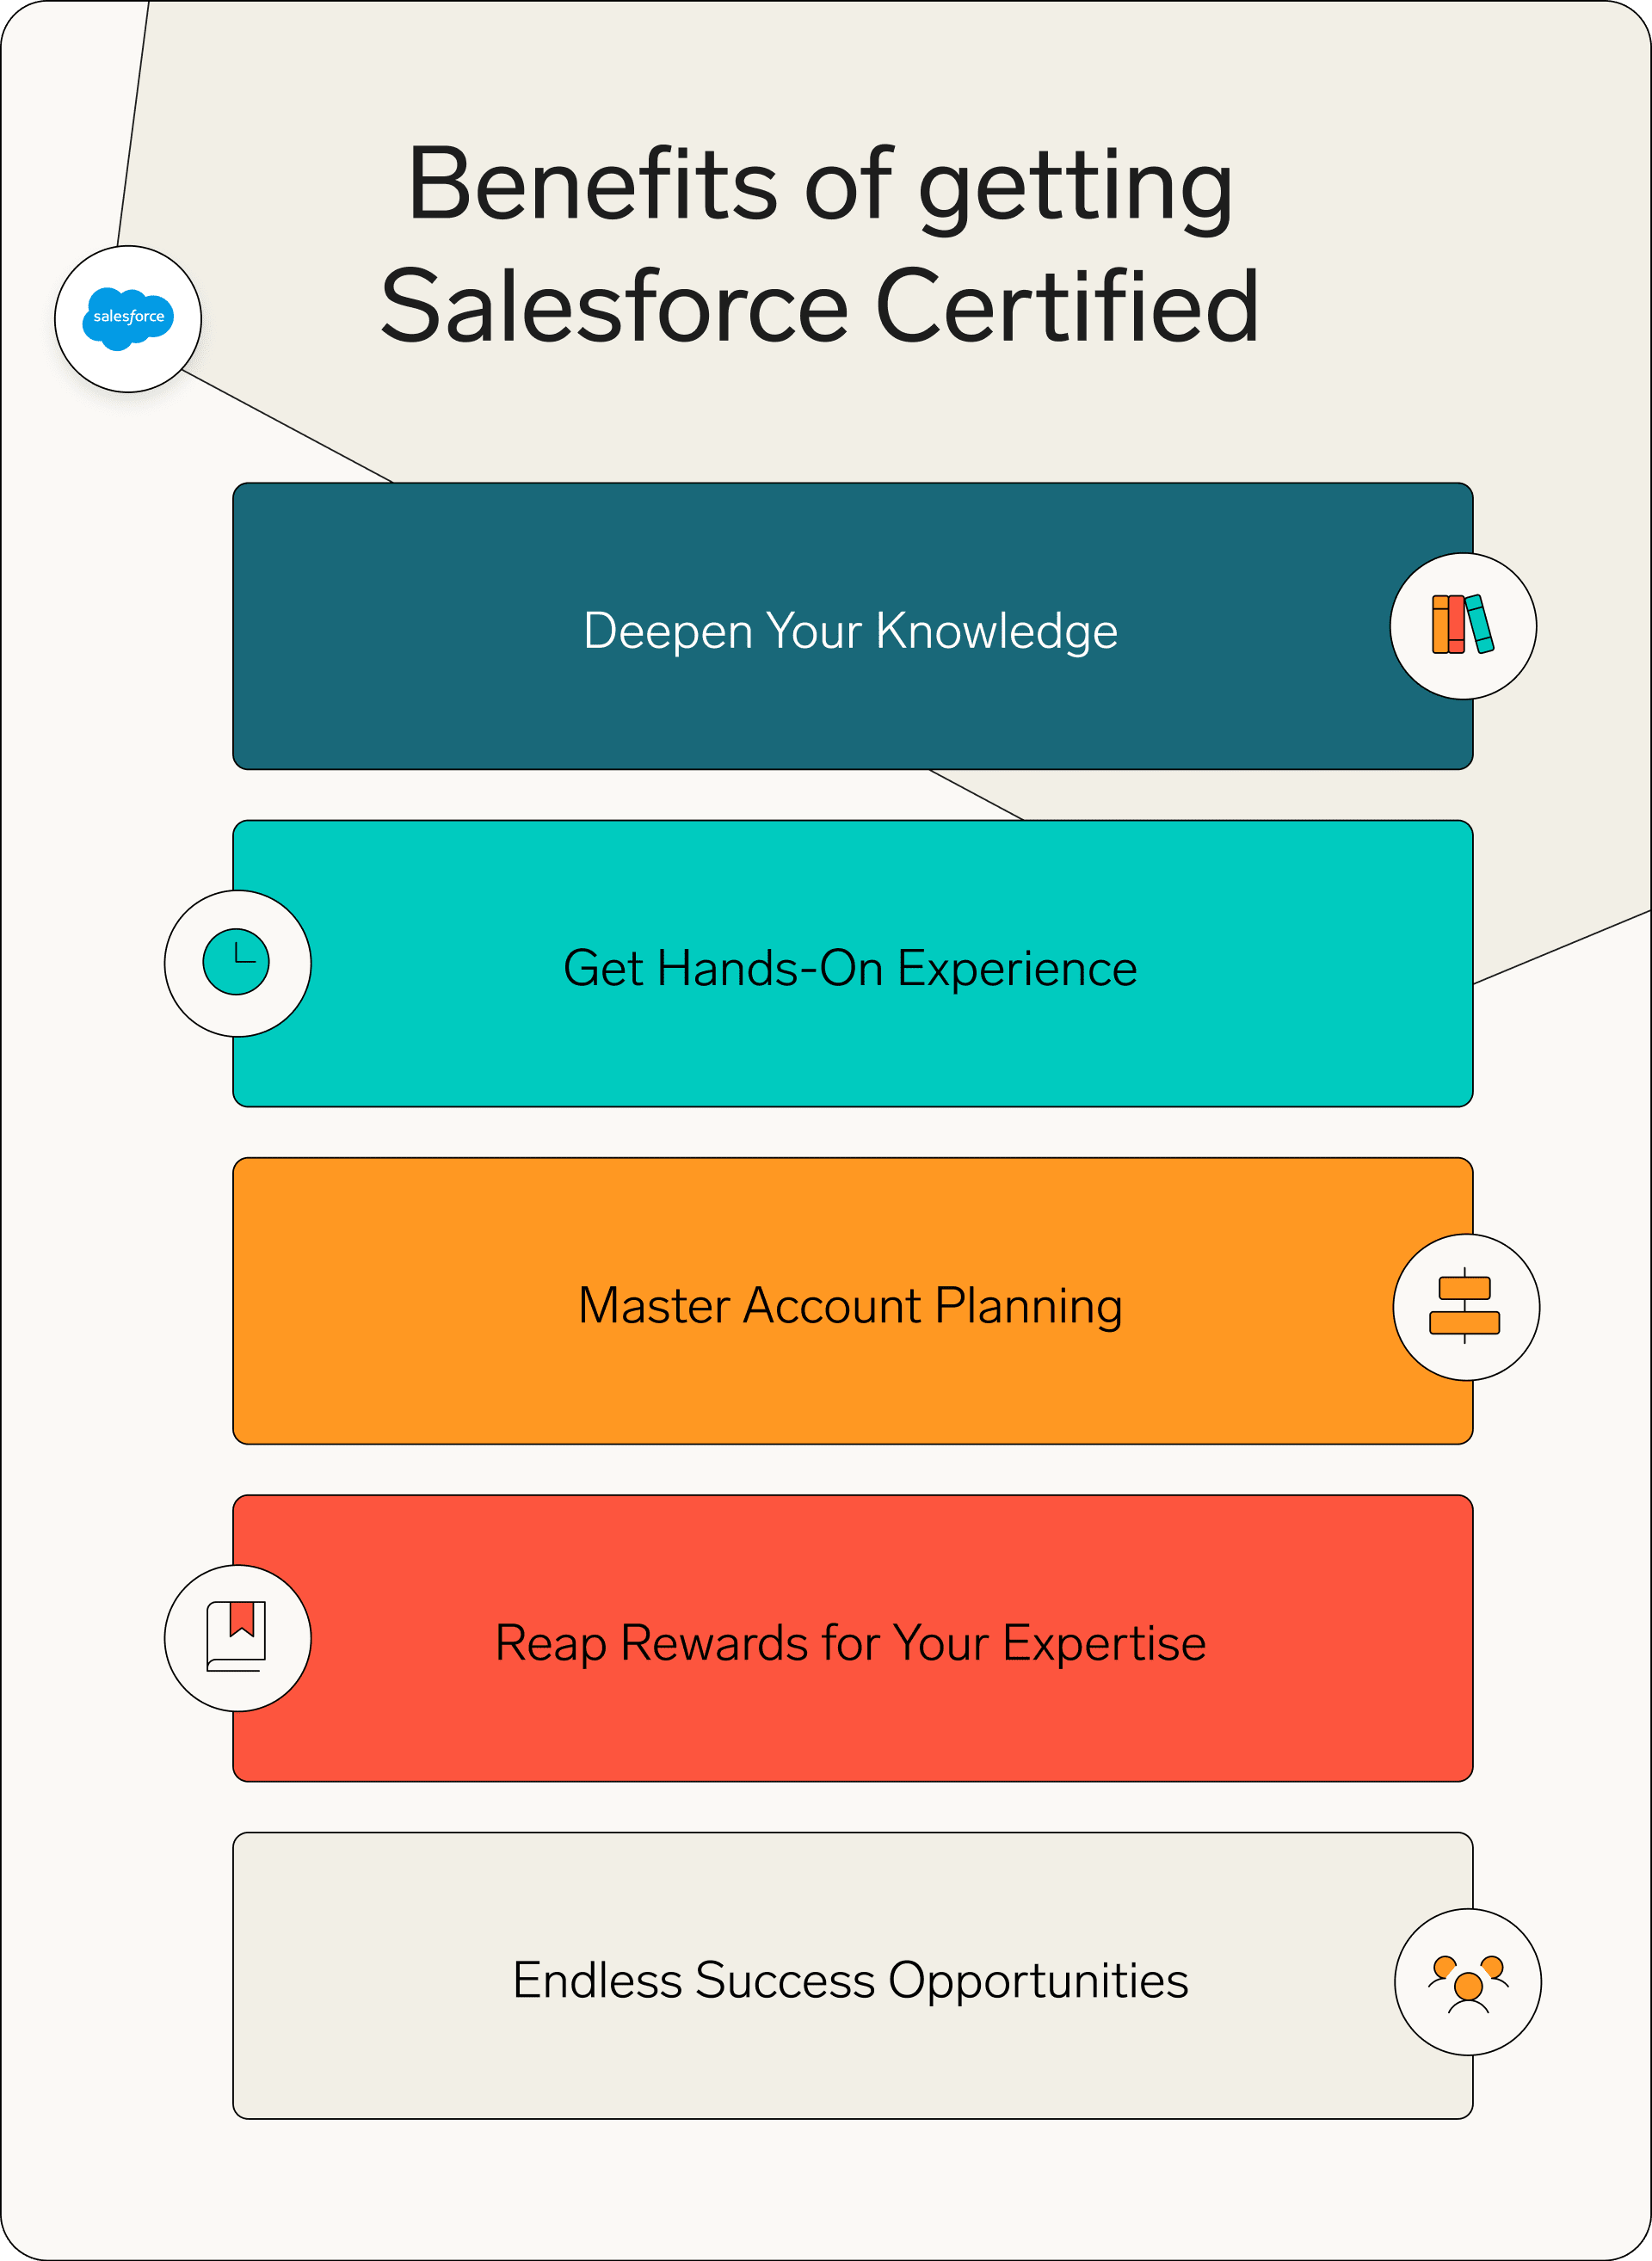 Everything You Need to Know About Salesforce Certification